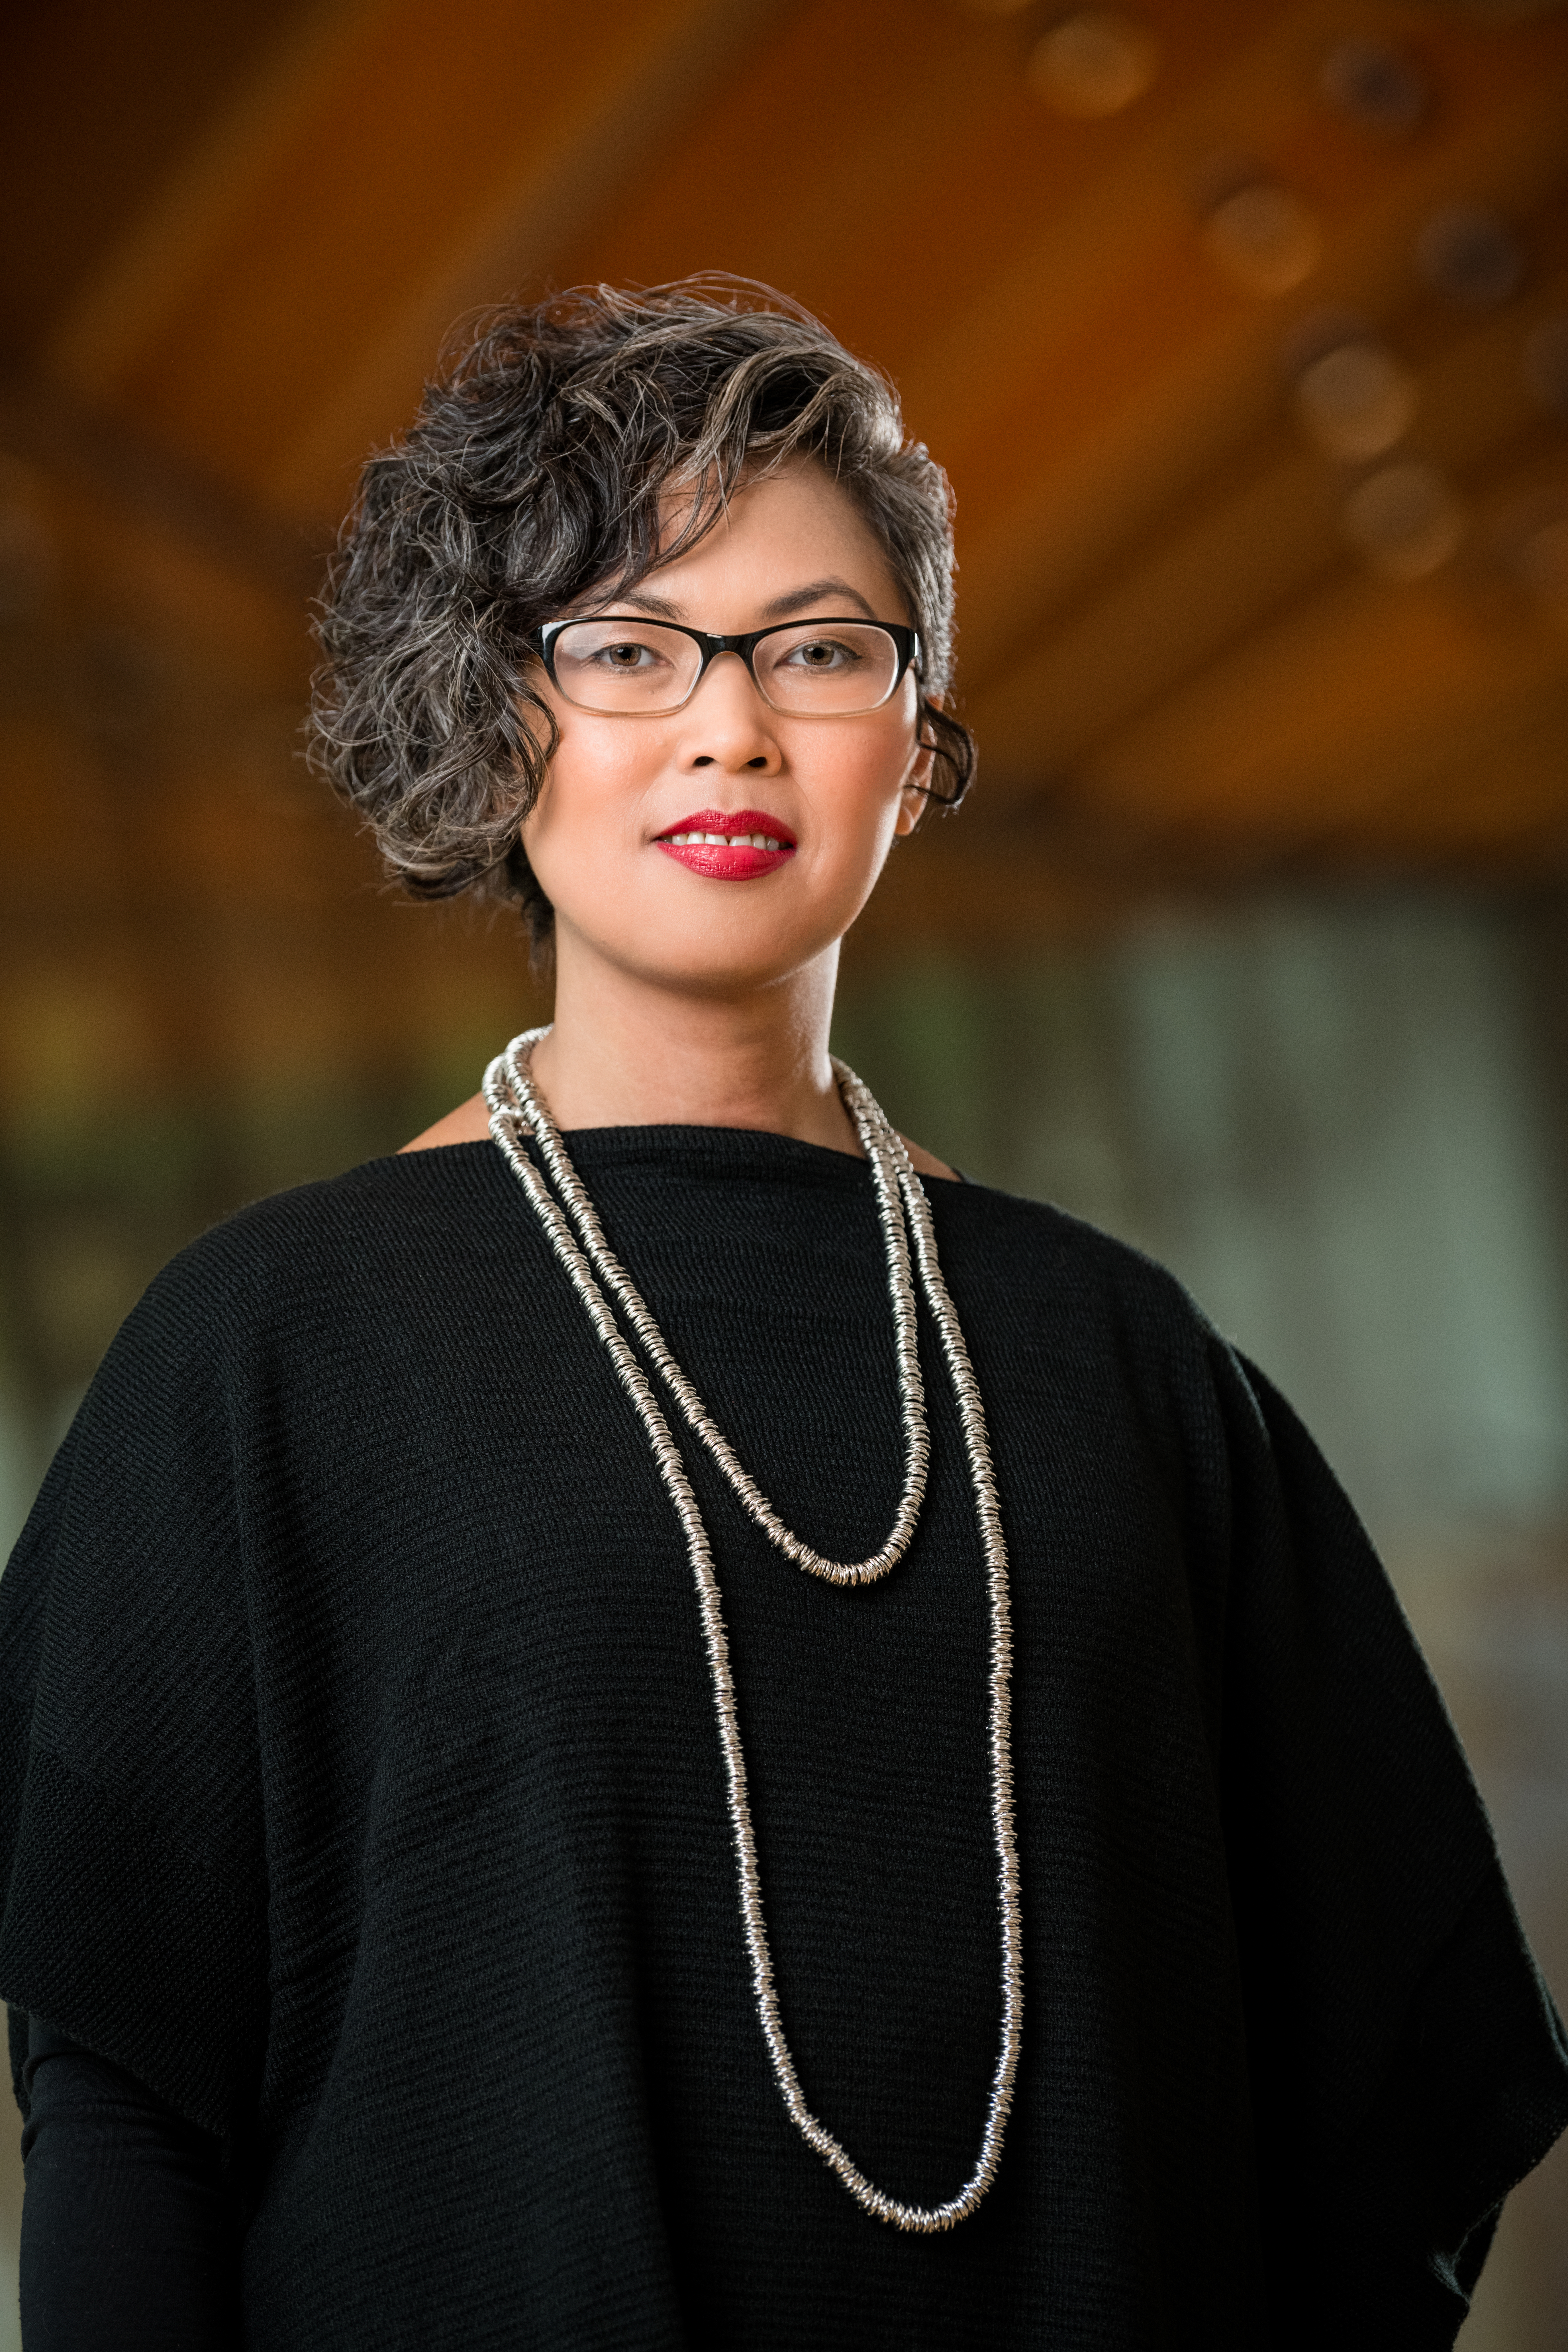 Crystal Bridges Museum of American Art Announces Chief Education Officer